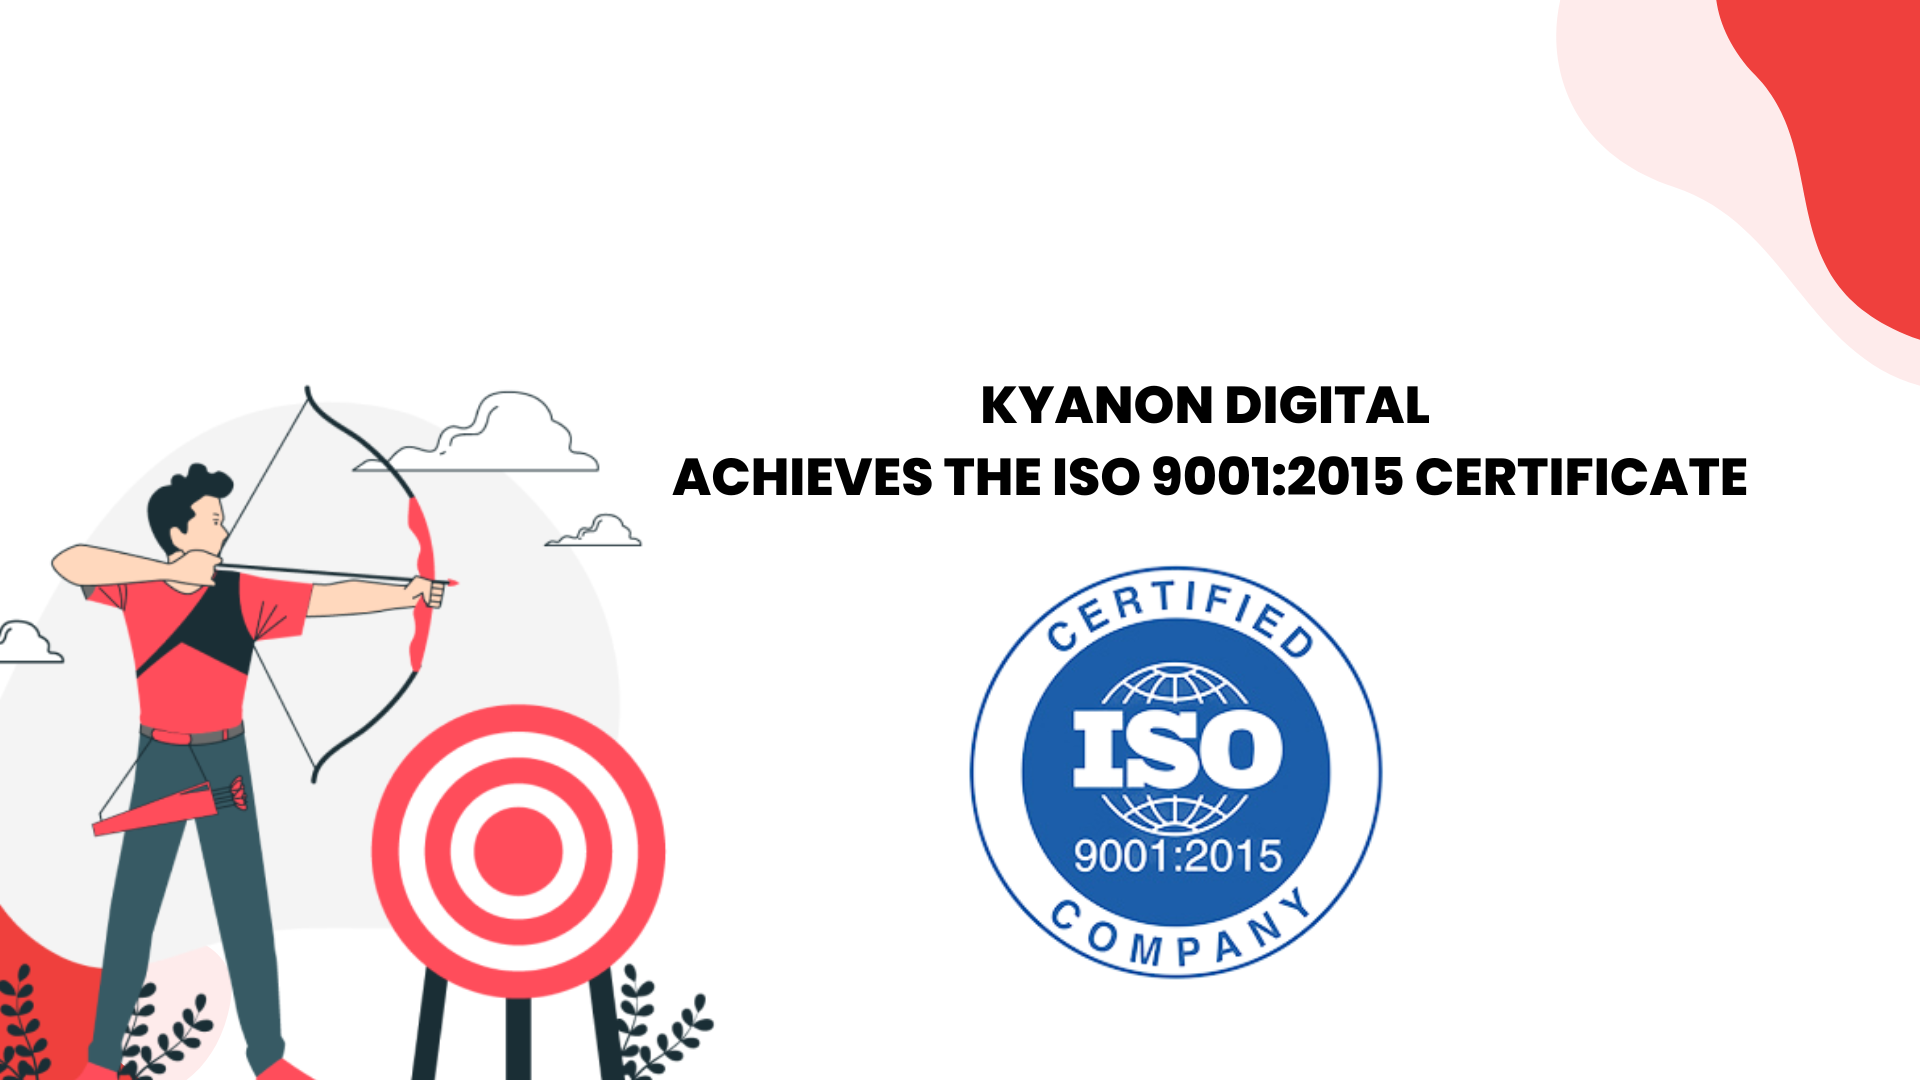 kyanon digital achieves the iso 90012015 certificate